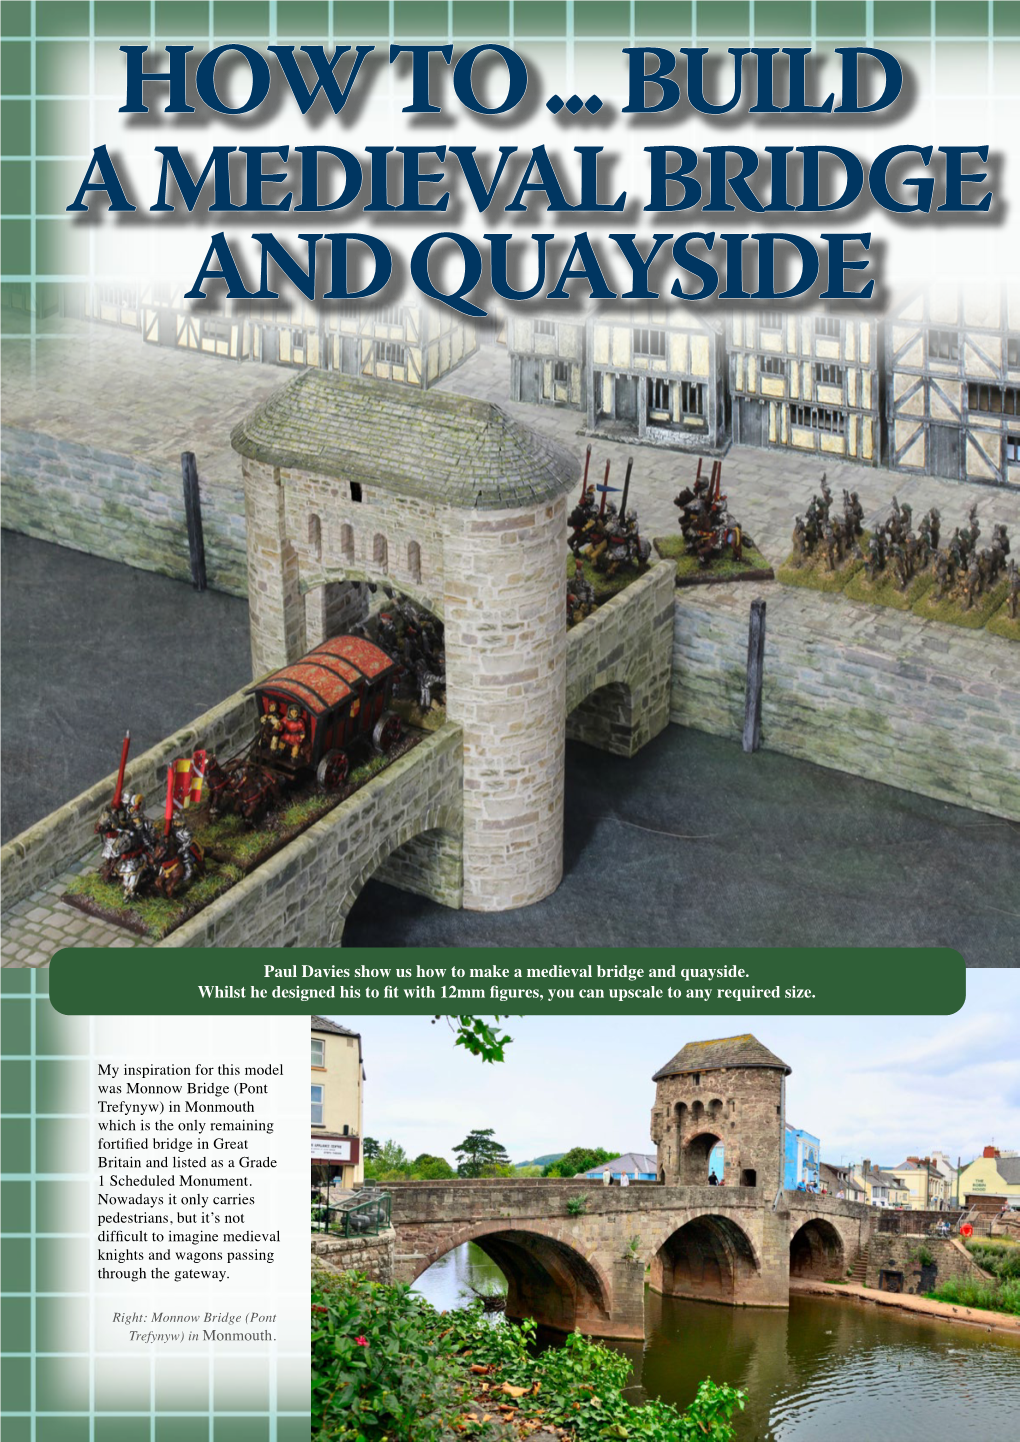 A Medieval Bridge and Quayside